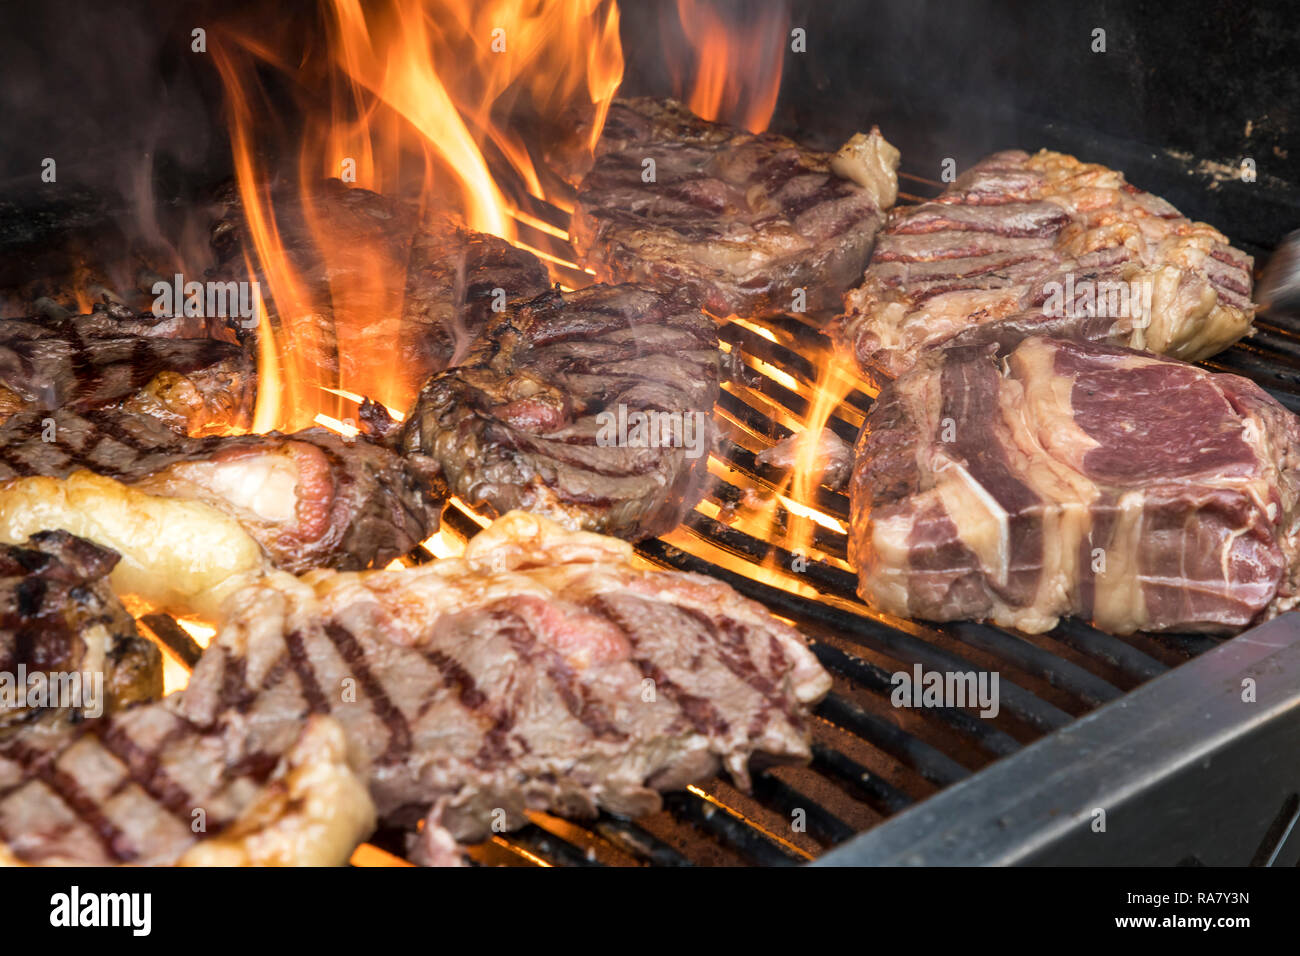 Steaks, from Galloway beef, are roasted on a grill, Stock Photo